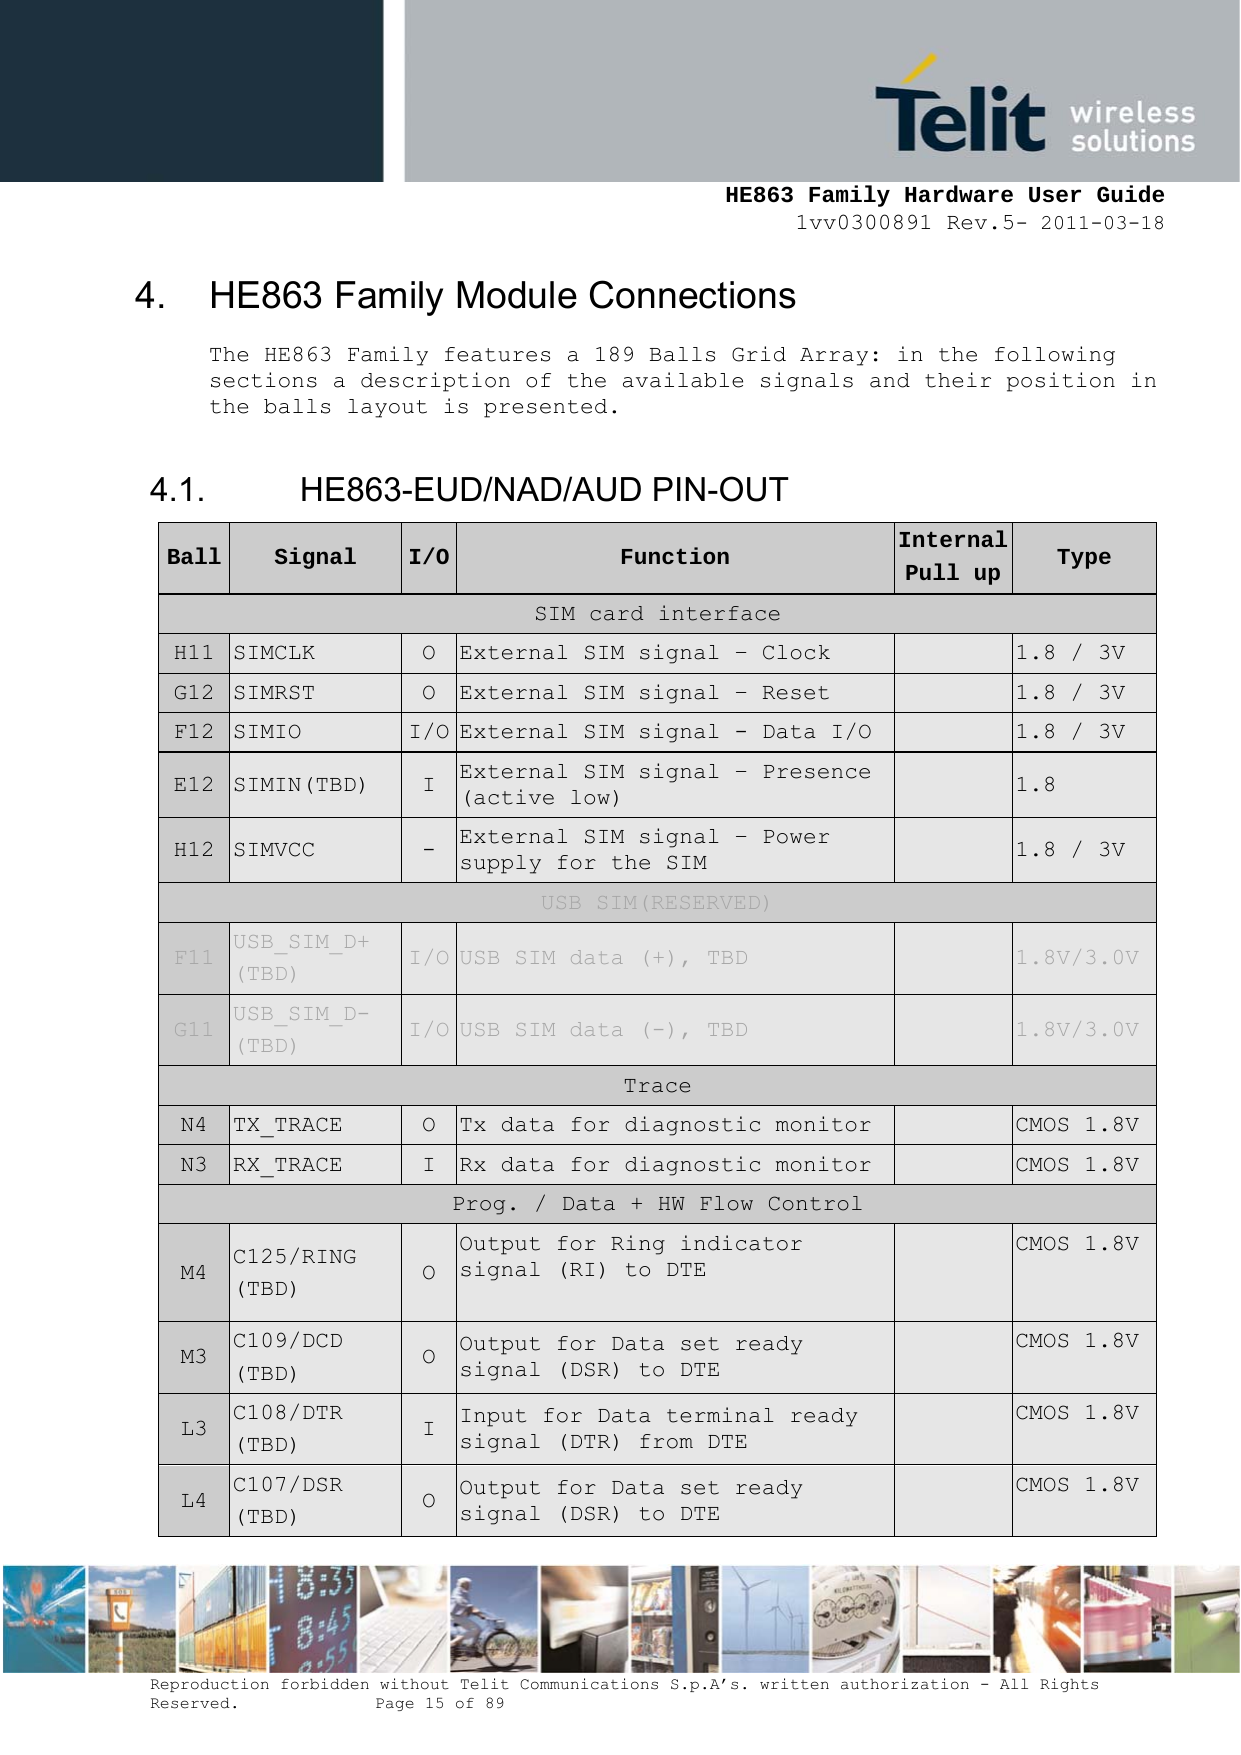     HE863 Family Hardware User Guide 1vv0300891 Rev.5- 2011-03-18    Reproduction forbidden without Telit Communications S.p.A’s. written authorization - All Rights Reserved.    Page 15 of 89  4.  HE863 Family Module Connections The HE863 Family features a 189 Balls Grid Array: in the following sections a description of the available signals and their position in the balls layout is presented.  4.1. HE863-EUD/NAD/AUD PIN-OUT Ball  Signal  I/O  Function  Internal Pull up  Type SIM card interface H11  SIMCLK  O  External SIM signal – Clock   1.8 / 3V G12  SIMRST  O  External SIM signal – Reset   1.8 / 3V F12  SIMIO  I/O External SIM signal - Data I/O   1.8 / 3V E12  SIMIN(TBD)  I  External SIM signal – Presence (active low)   1.8 H12  SIMVCC  -  External SIM signal – Power supply for the SIM   1.8 / 3V USB SIM(RESERVED) F11  USB_SIM_D+ (TBD)  I/O USB SIM data (+), TBD   1.8V/3.0VG11  USB_SIM_D- (TBD)  I/O USB SIM data (-), TBD   1.8V/3.0VTrace N4  TX_TRACE  O  Tx data for diagnostic monitor   CMOS 1.8VN3  RX_TRACE  I  Rx data for diagnostic monitor   CMOS 1.8VProg. / Data + HW Flow Control M4  C125/RING (TBD)  O Output for Ring indicator signal (RI) to DTE   CMOS 1.8VM3  C109/DCD (TBD)  O  Output for Data set ready signal (DSR) to DTE   CMOS 1.8VL3  C108/DTR (TBD)  I  Input for Data terminal ready signal (DTR) from DTE   CMOS 1.8VL4  C107/DSR (TBD)  O  Output for Data set ready signal (DSR) to DTE   CMOS 1.8V